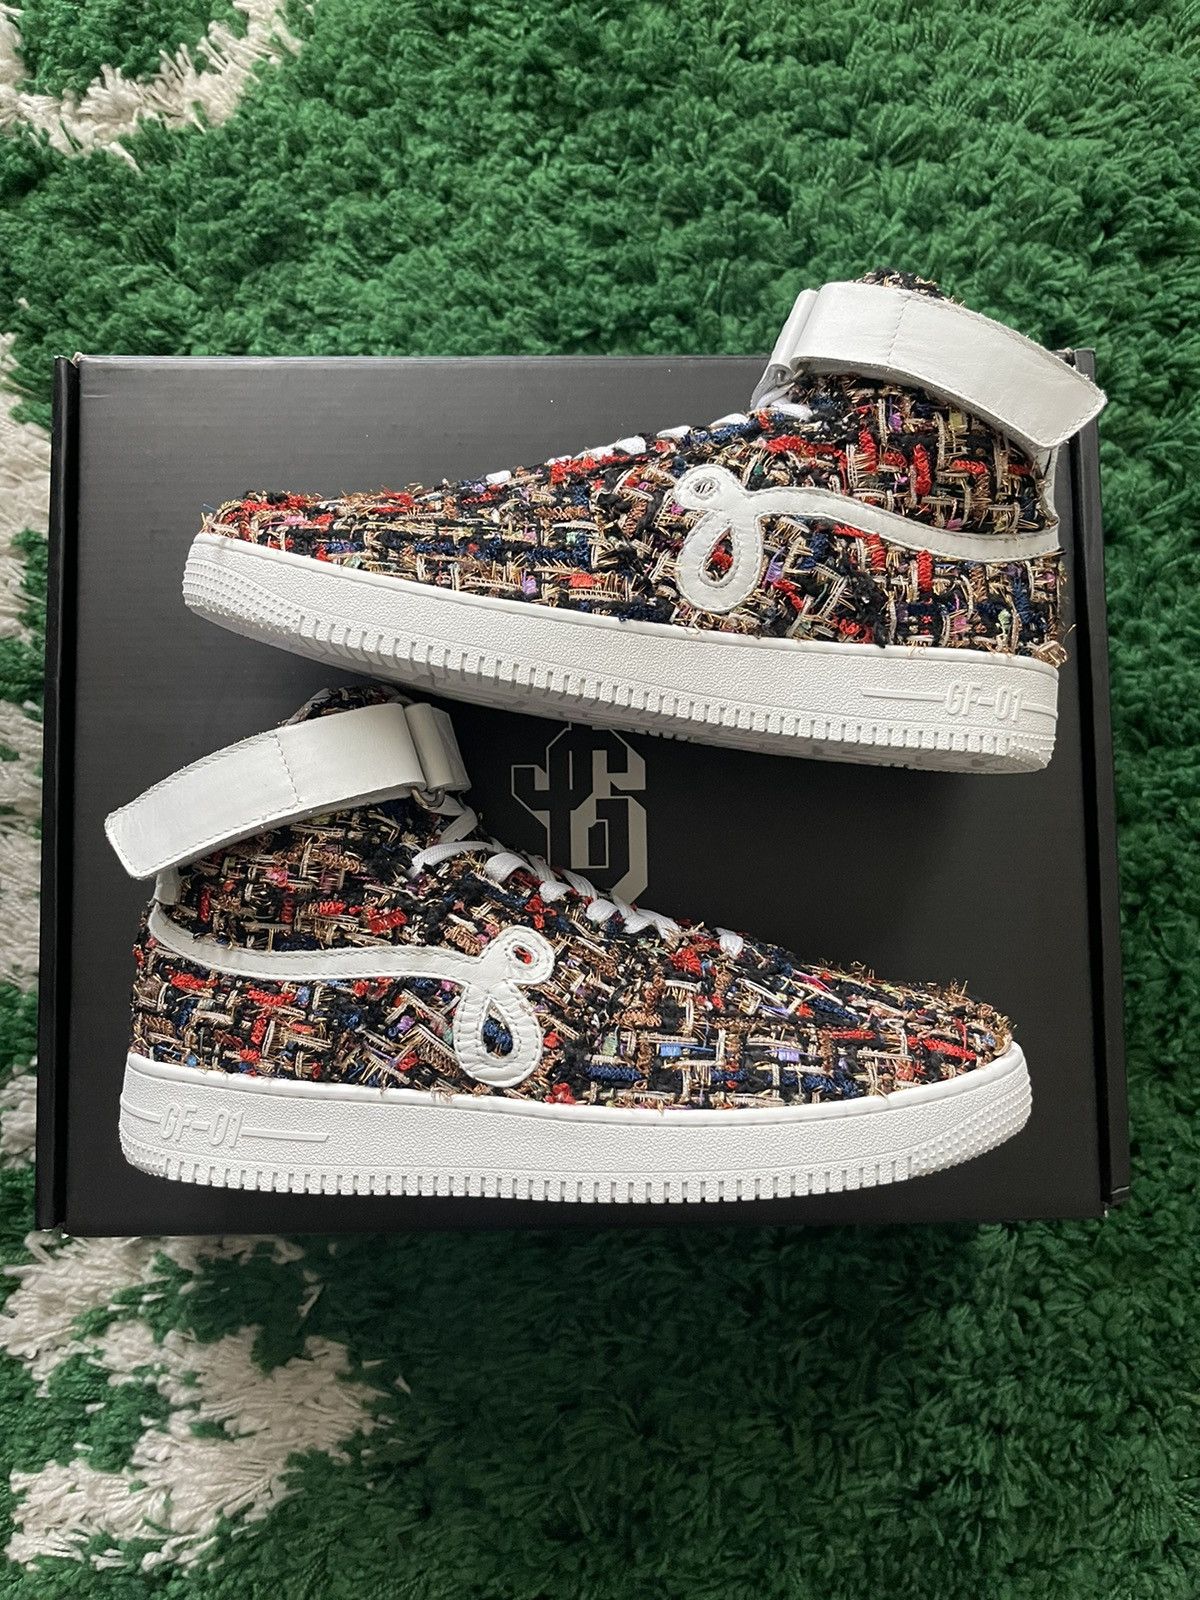 What The GF-01 Releasing Saturday May 6th at 12pm EST – John Geiger